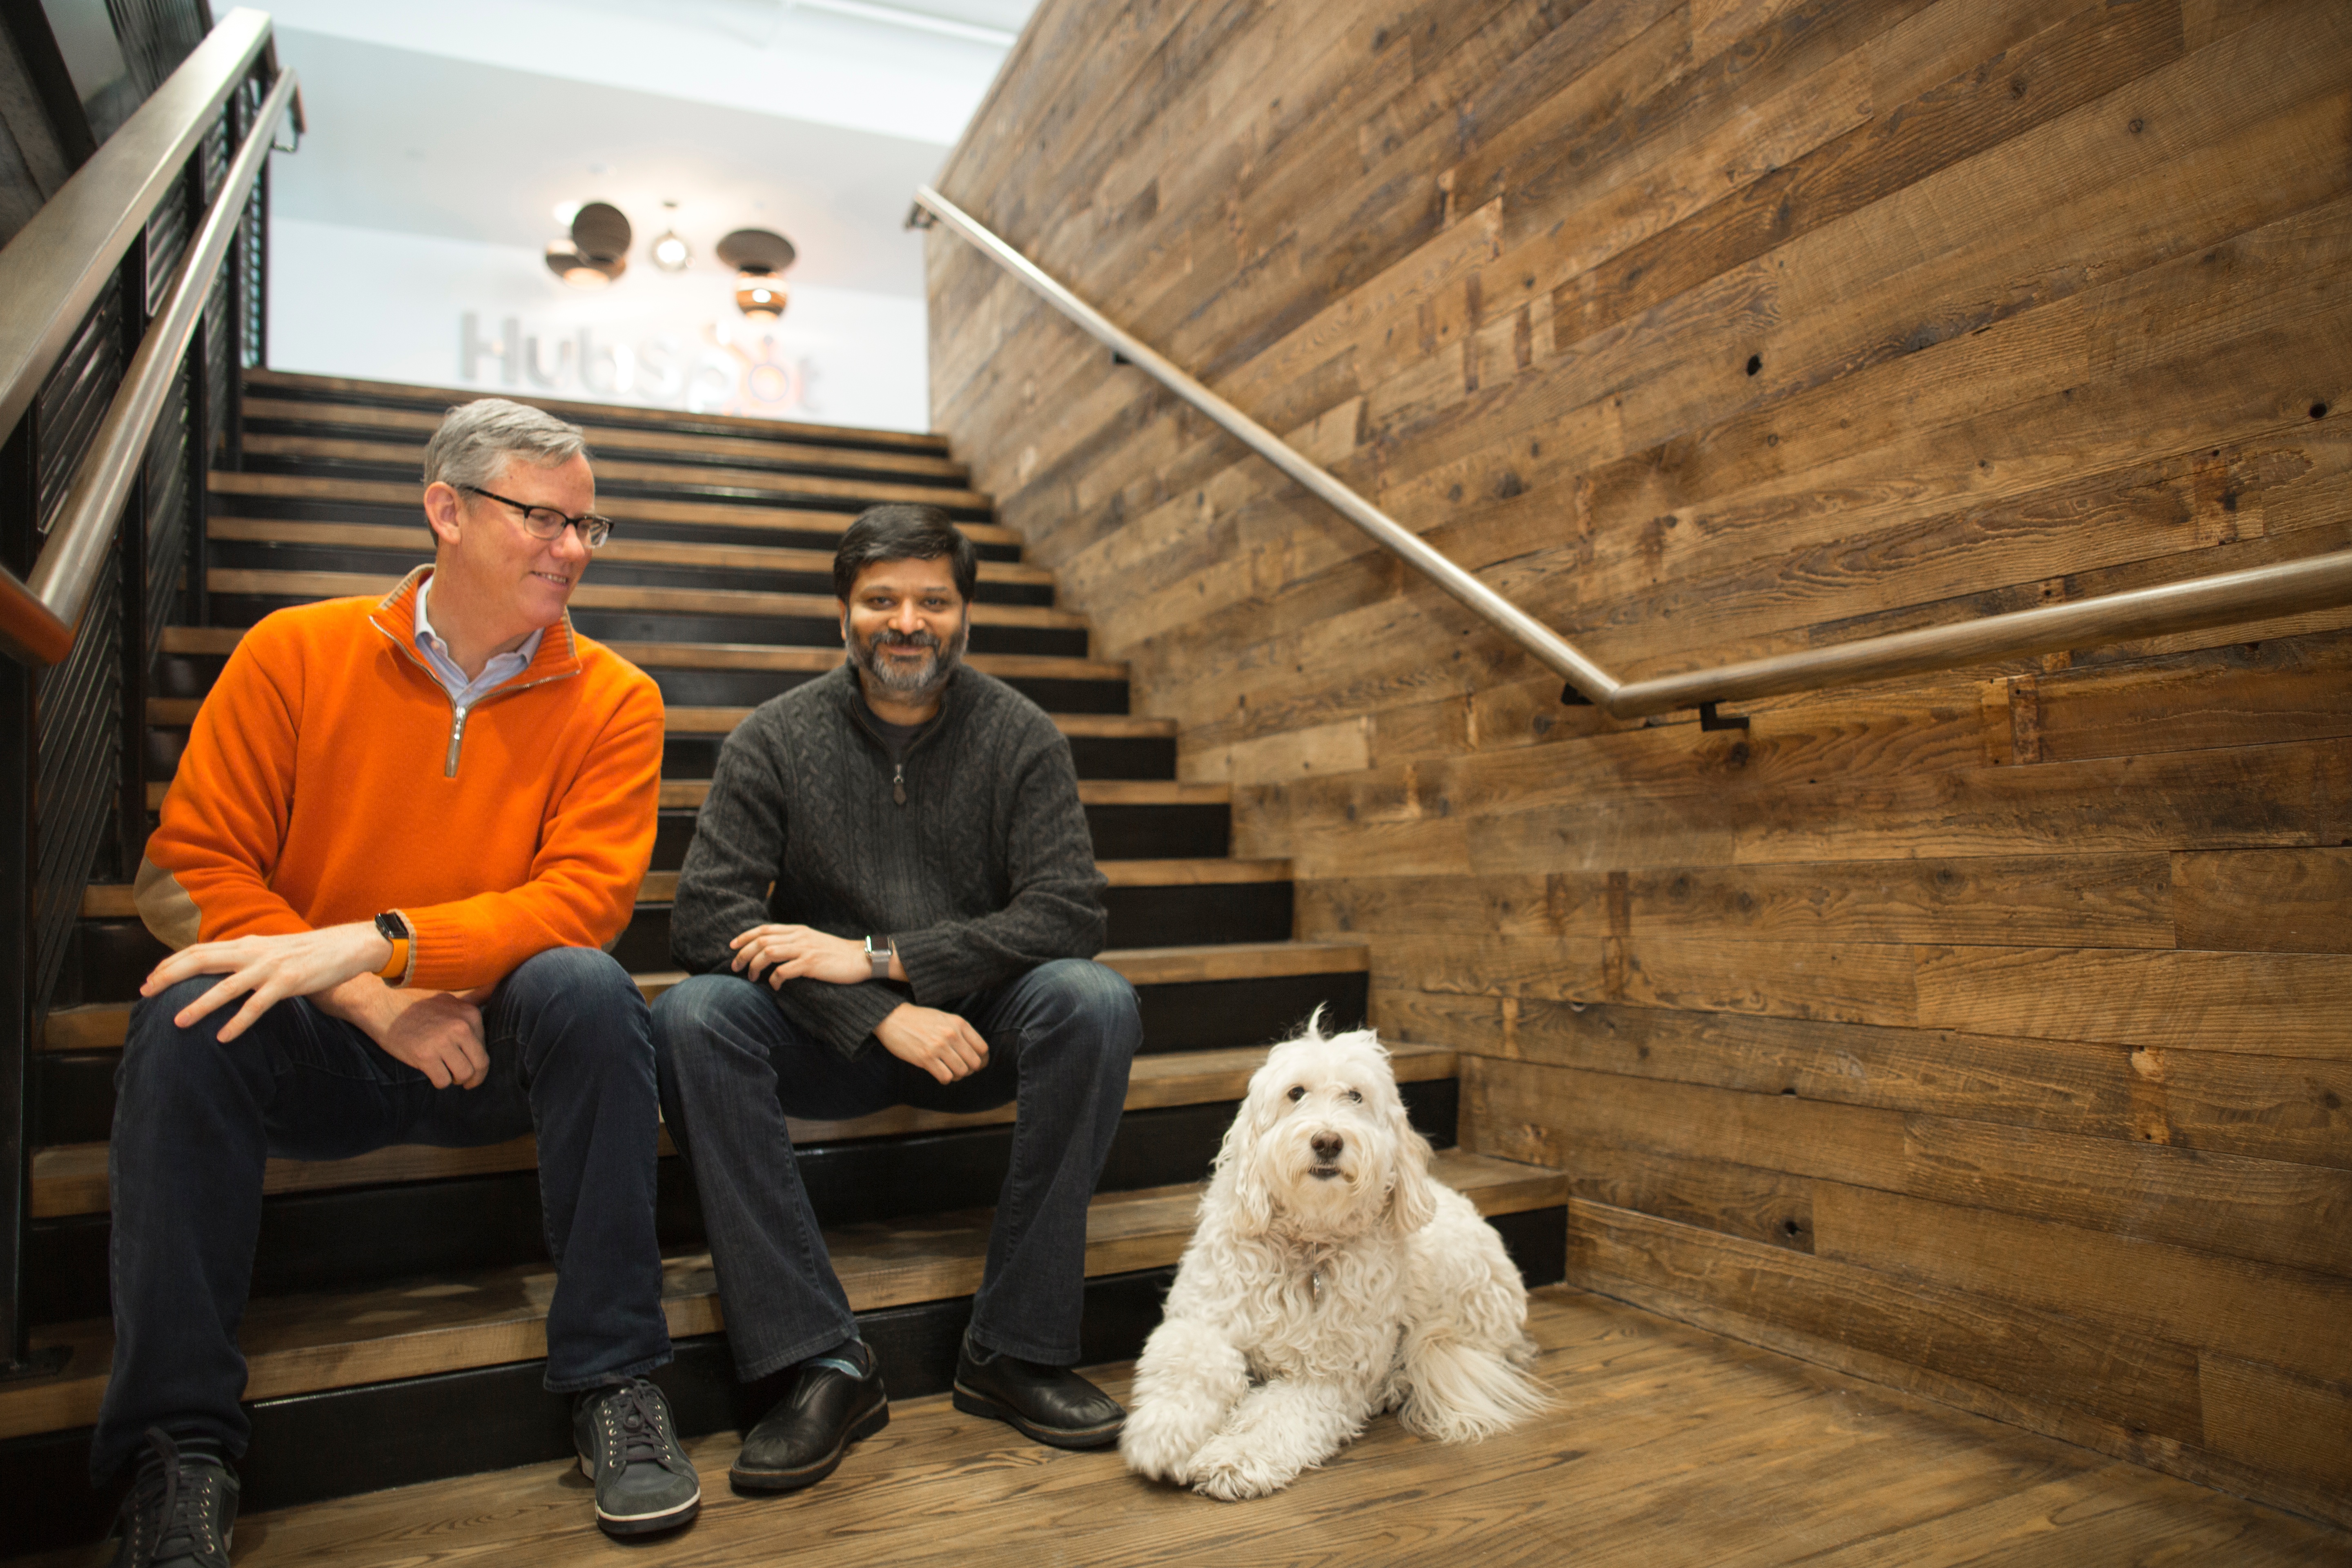 HubSpot Named to Inc.’s Founders 40 for Newly Public Companies Driving Innovation